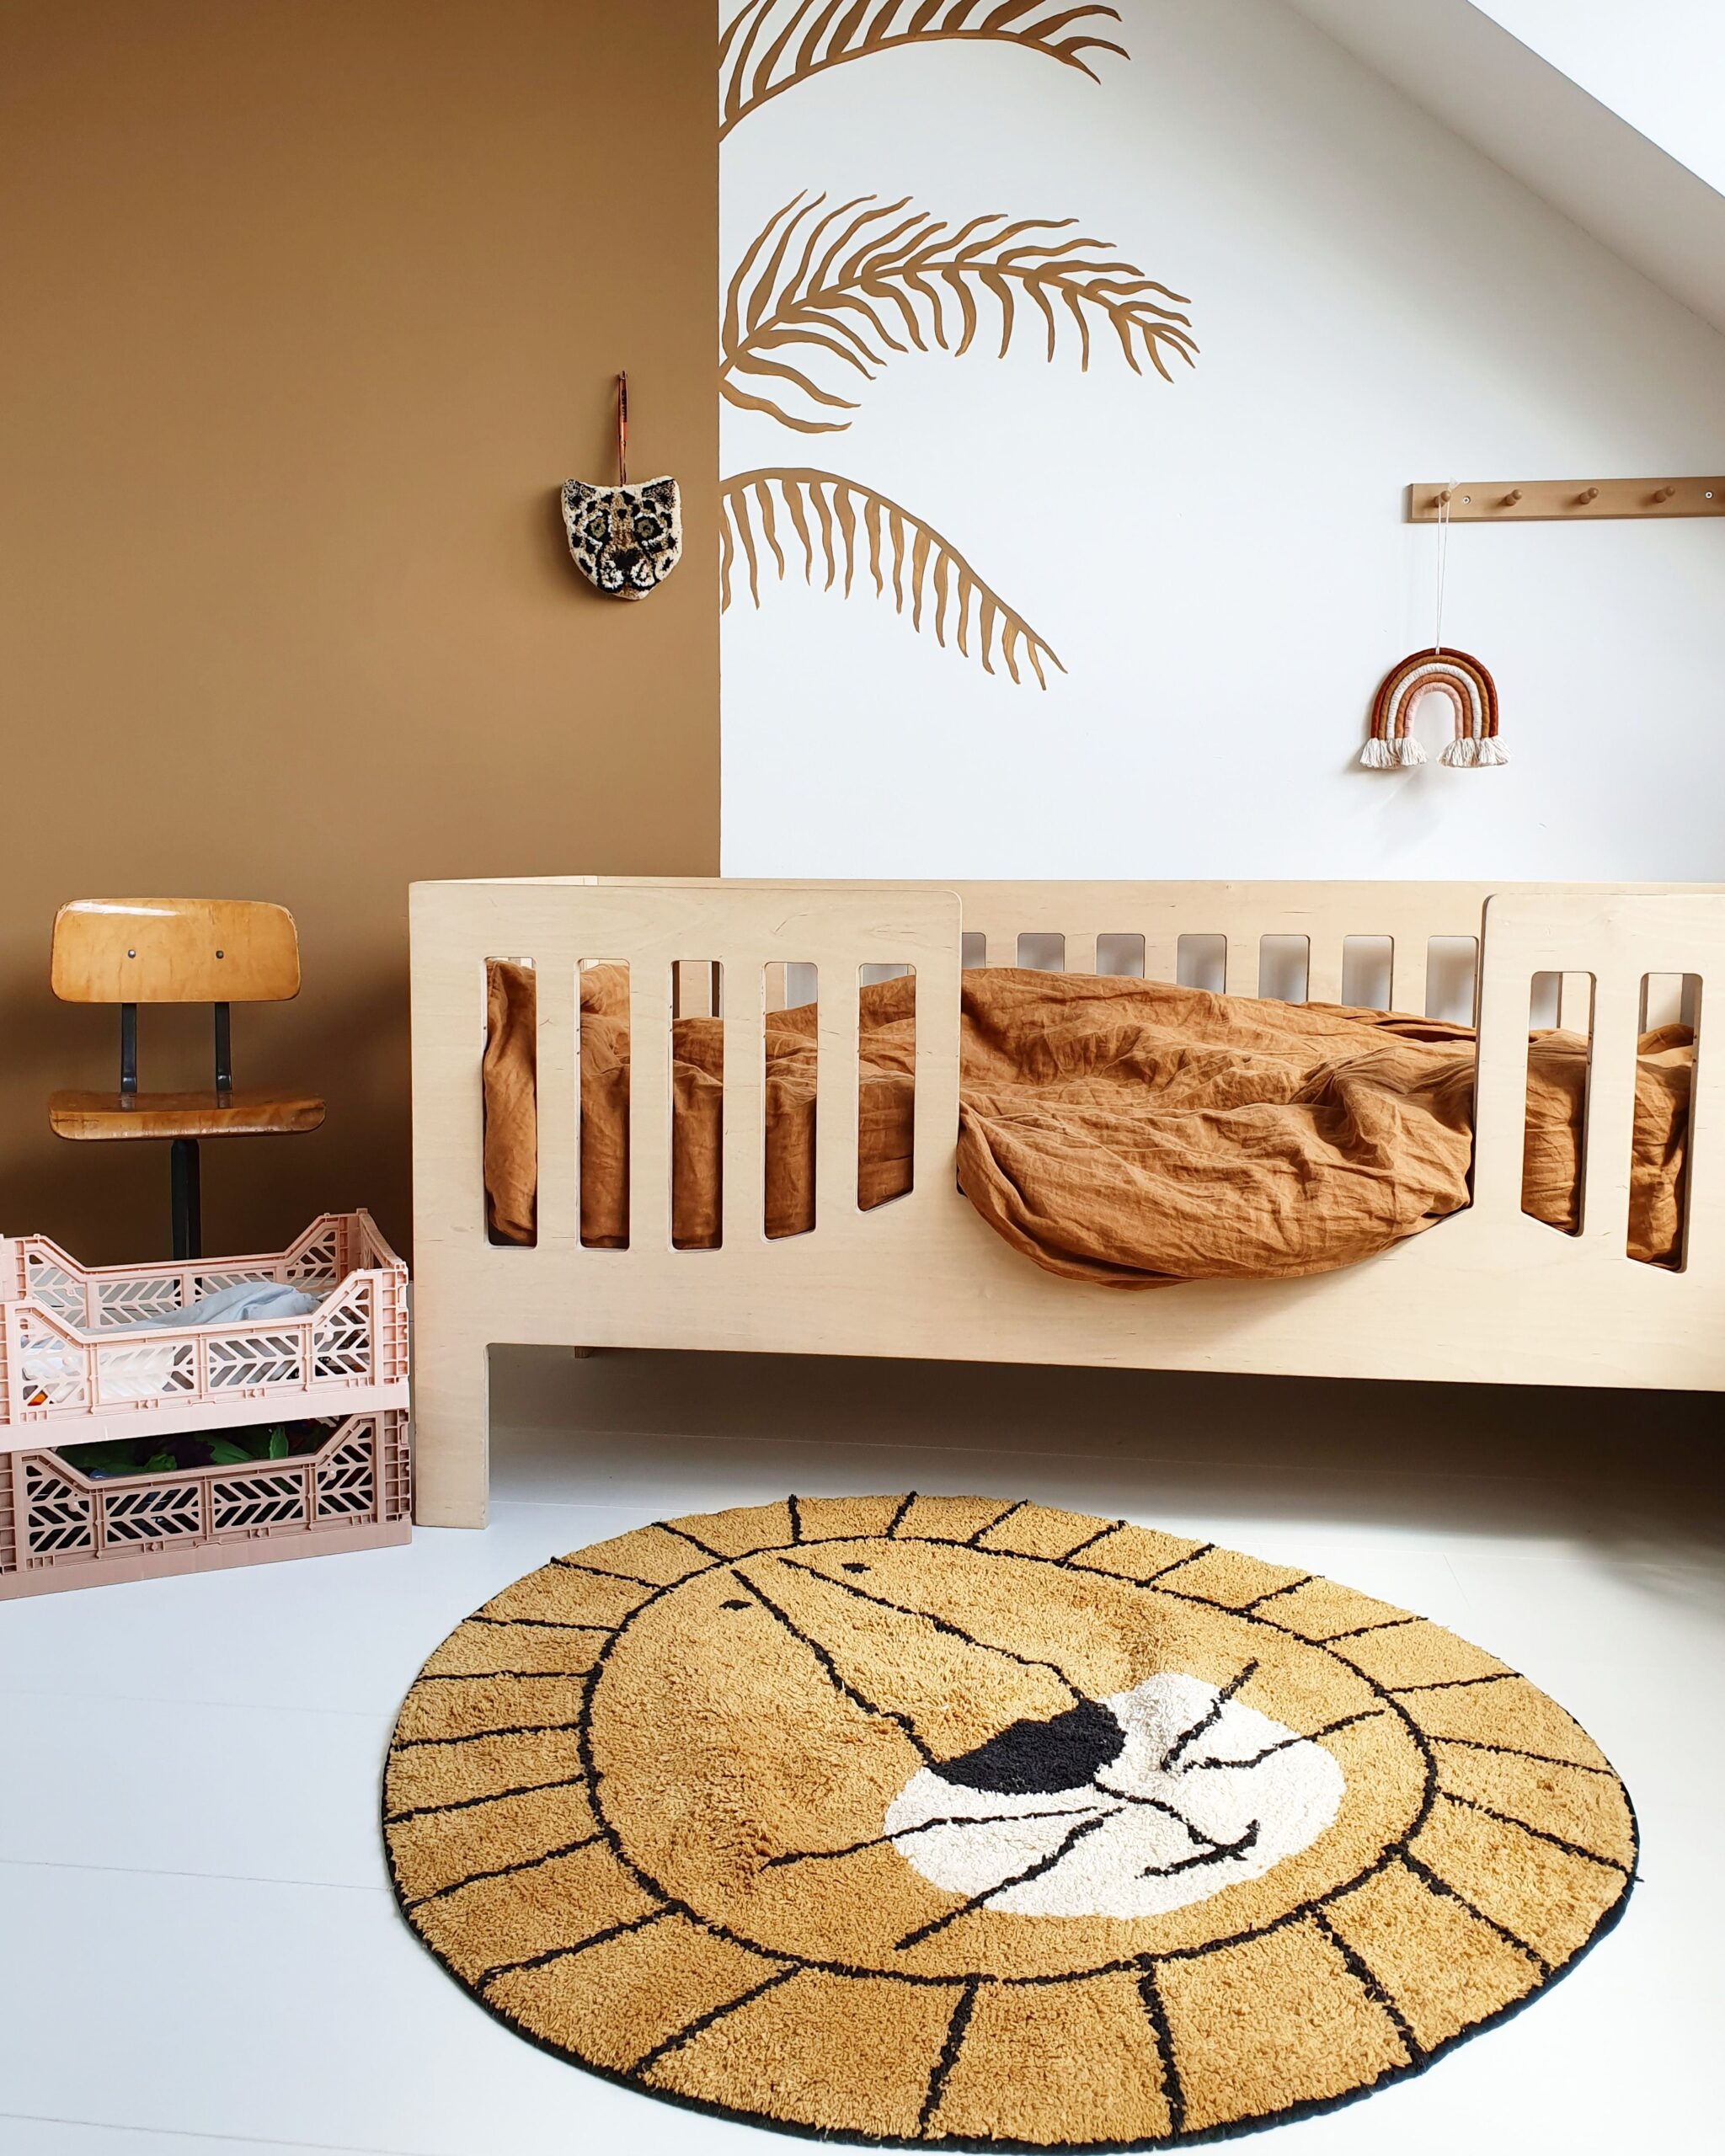 Kids Rugs for an Attractive Play Area